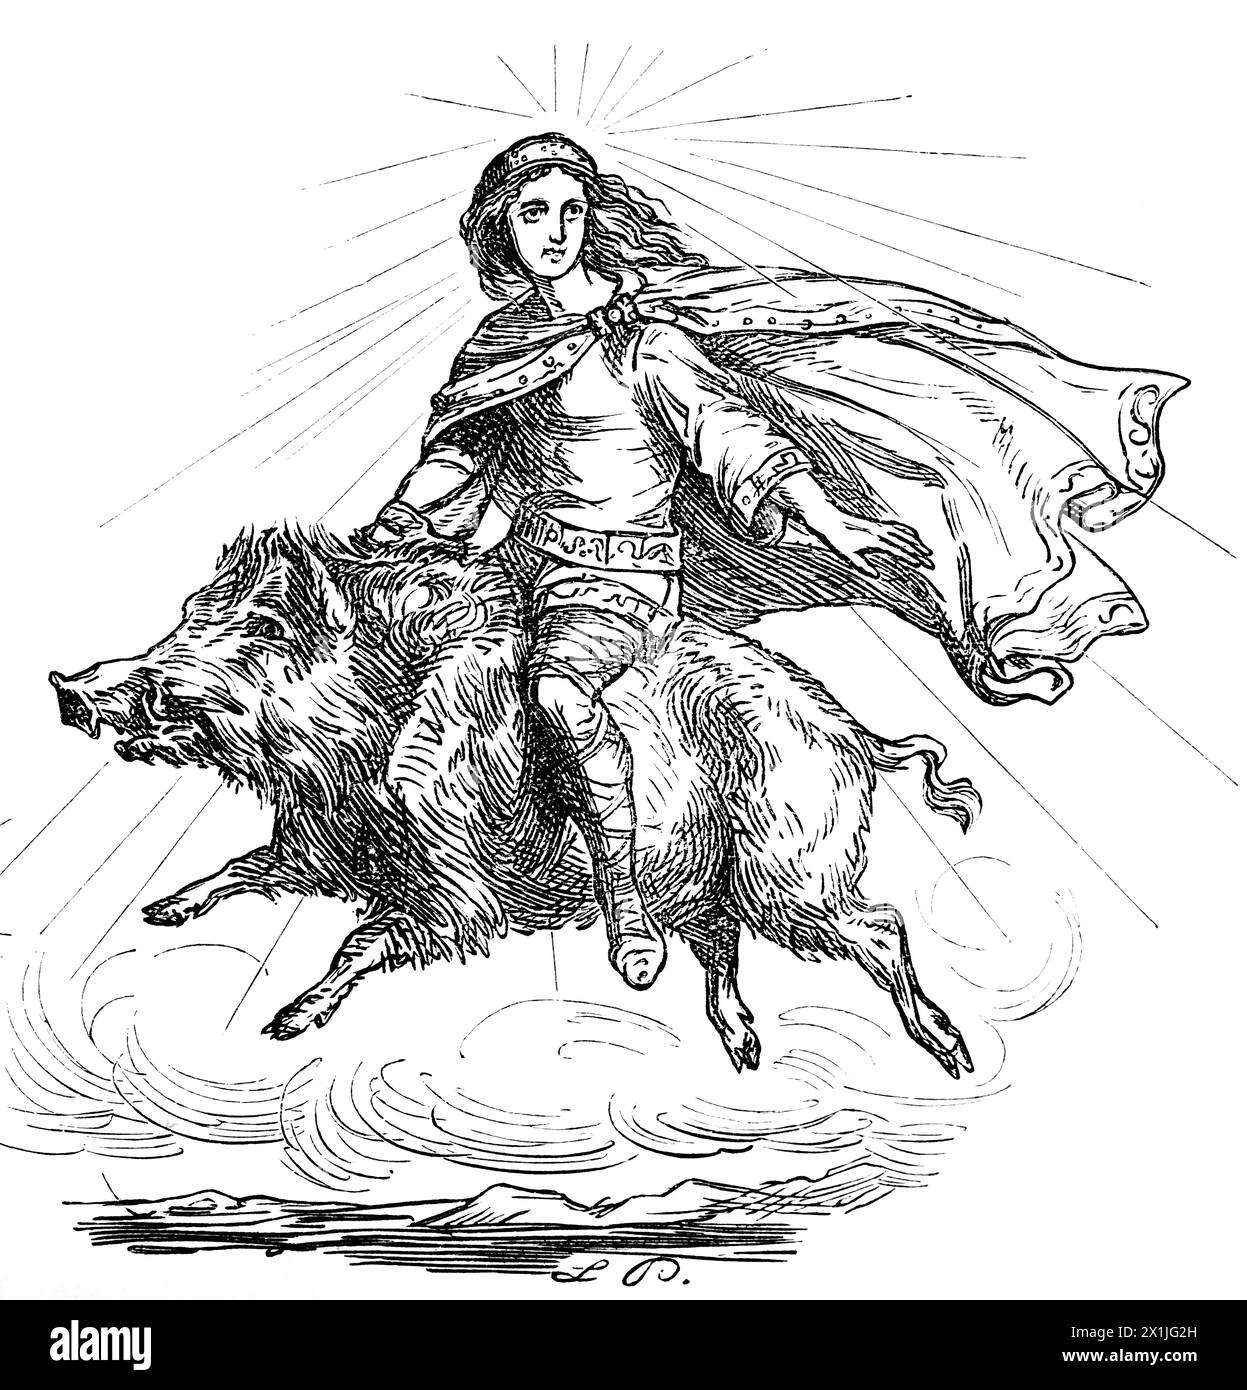 Fro or Freyer, the God of Glory, God of Love God of fertility, God of matrimony and God of Peace riding a golden boar, historical illustration 1880 Stock Photo